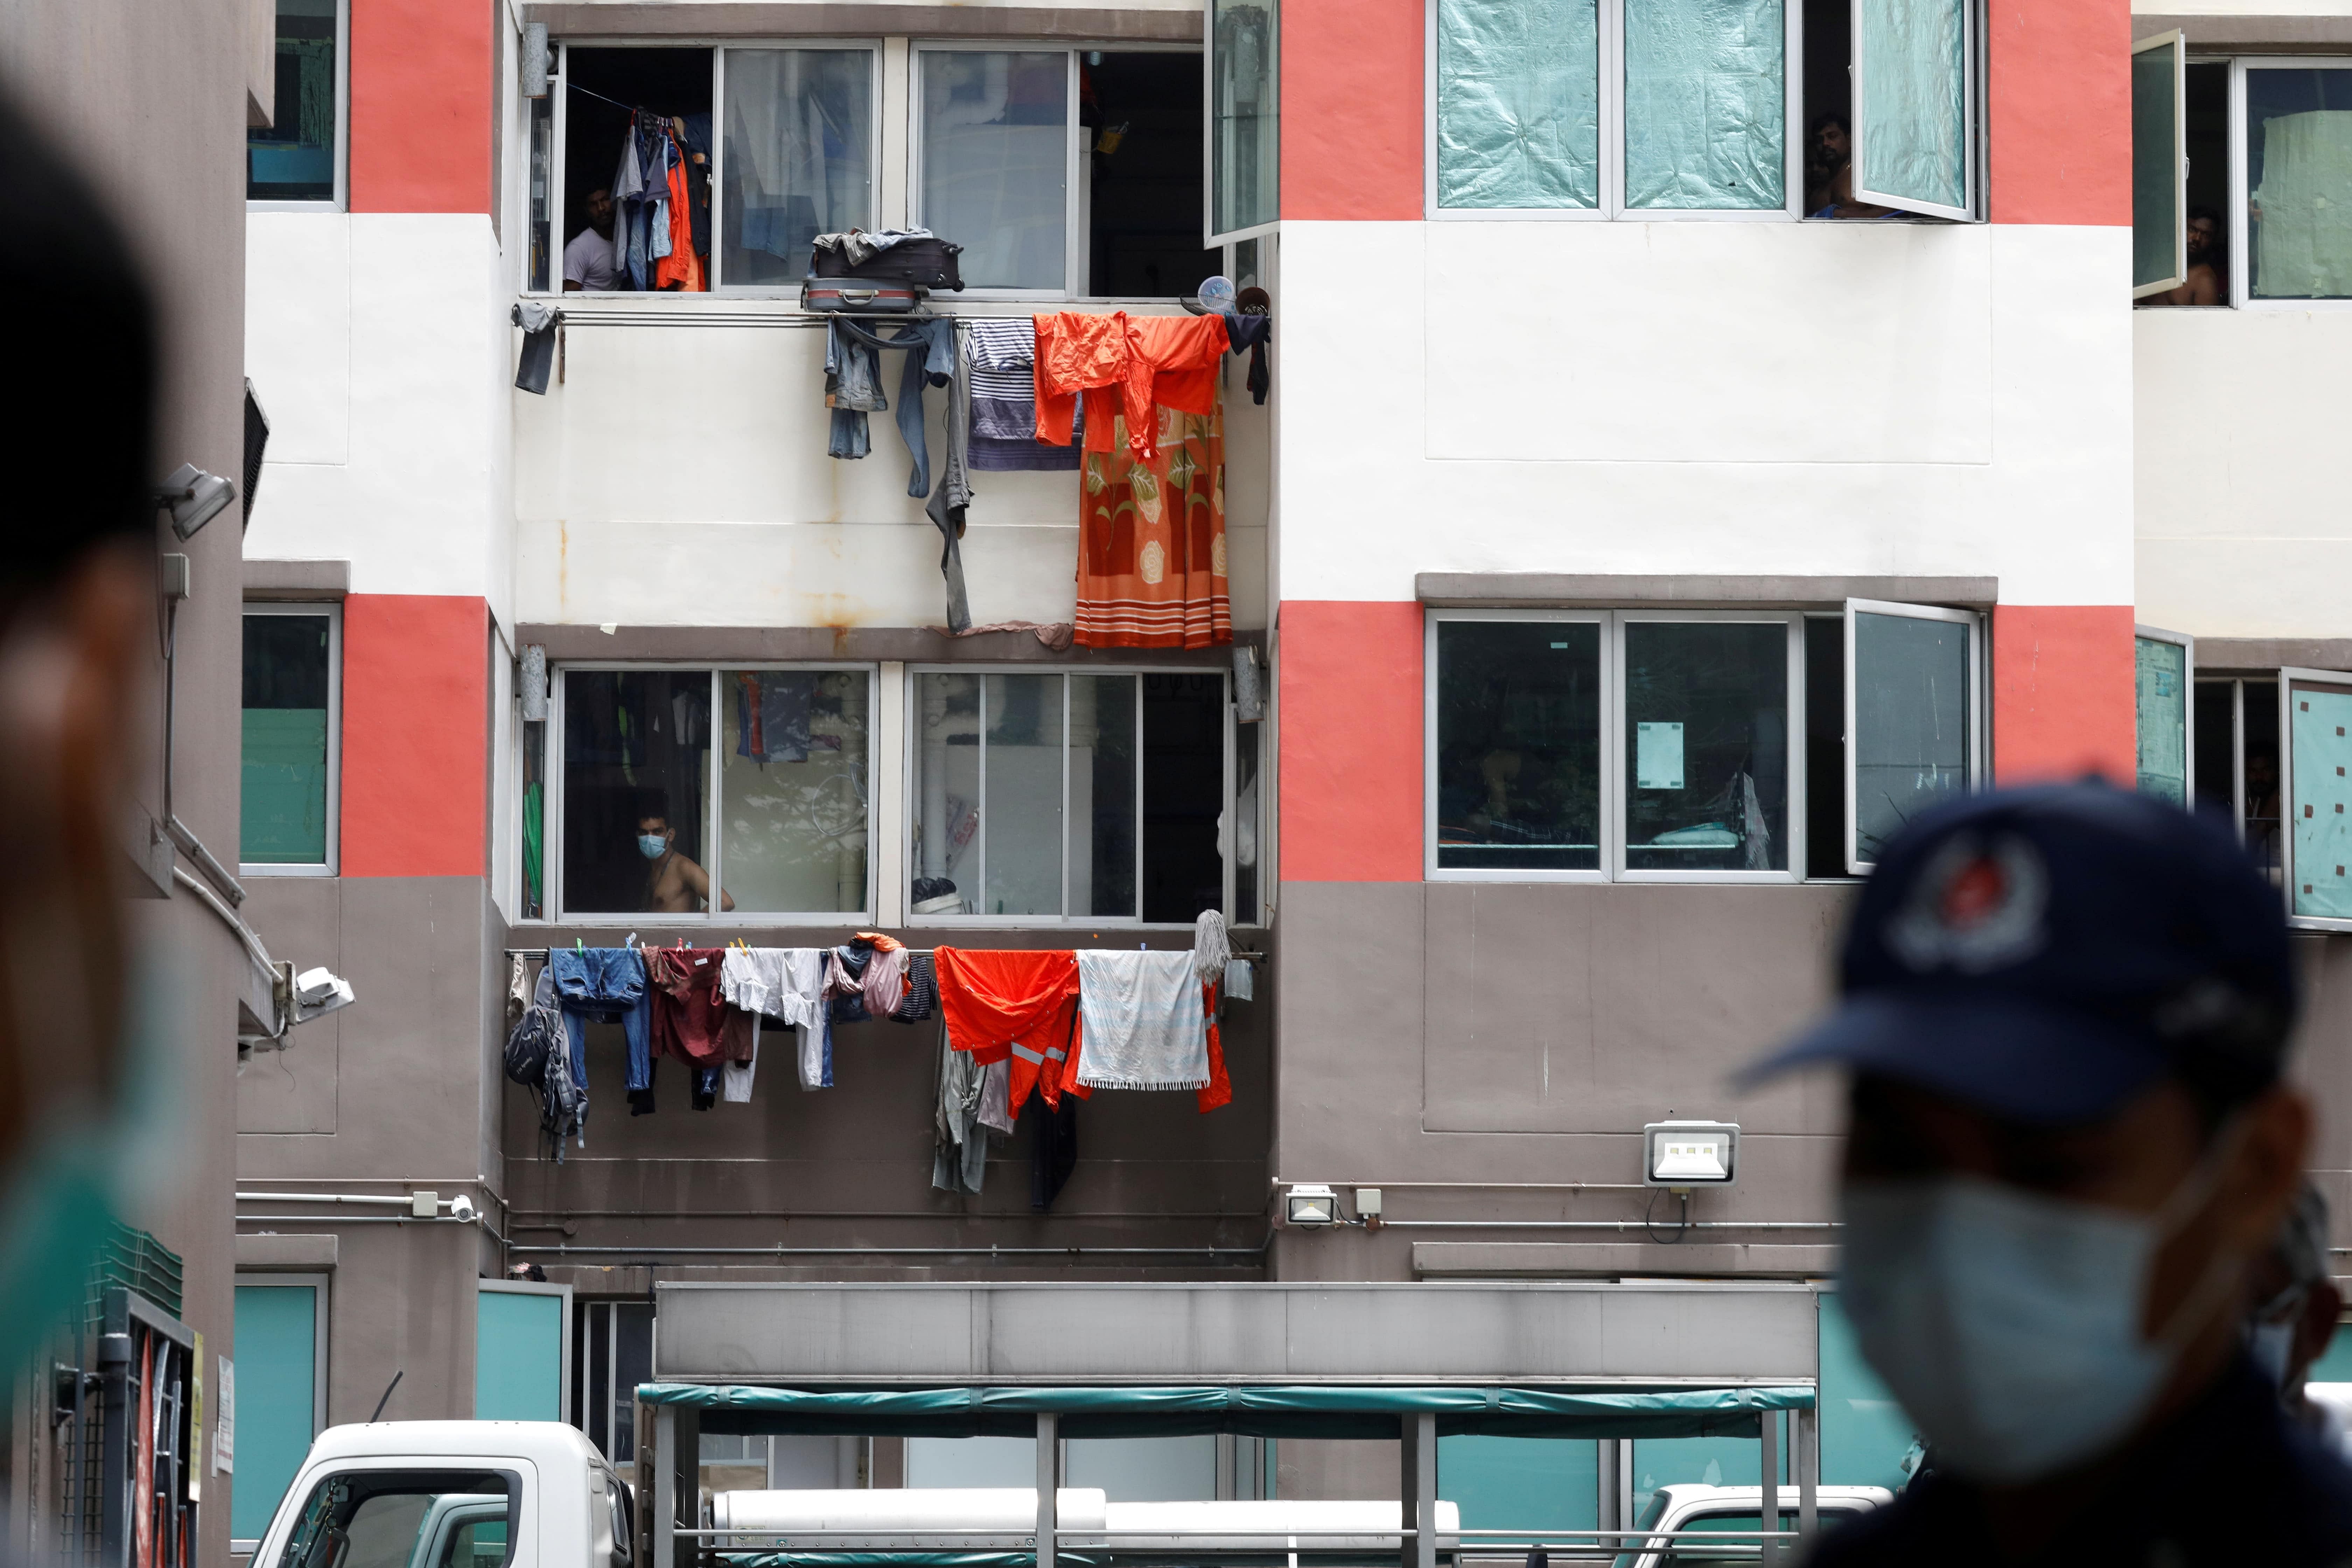 Workers look out of their dorm at Westlite Dormitory, one of the two workers? dormitory gazetted as isolation areas to curb the spread of coronavirus disease (COVID-19) in Singapore. (Credit: Reuters Photo)